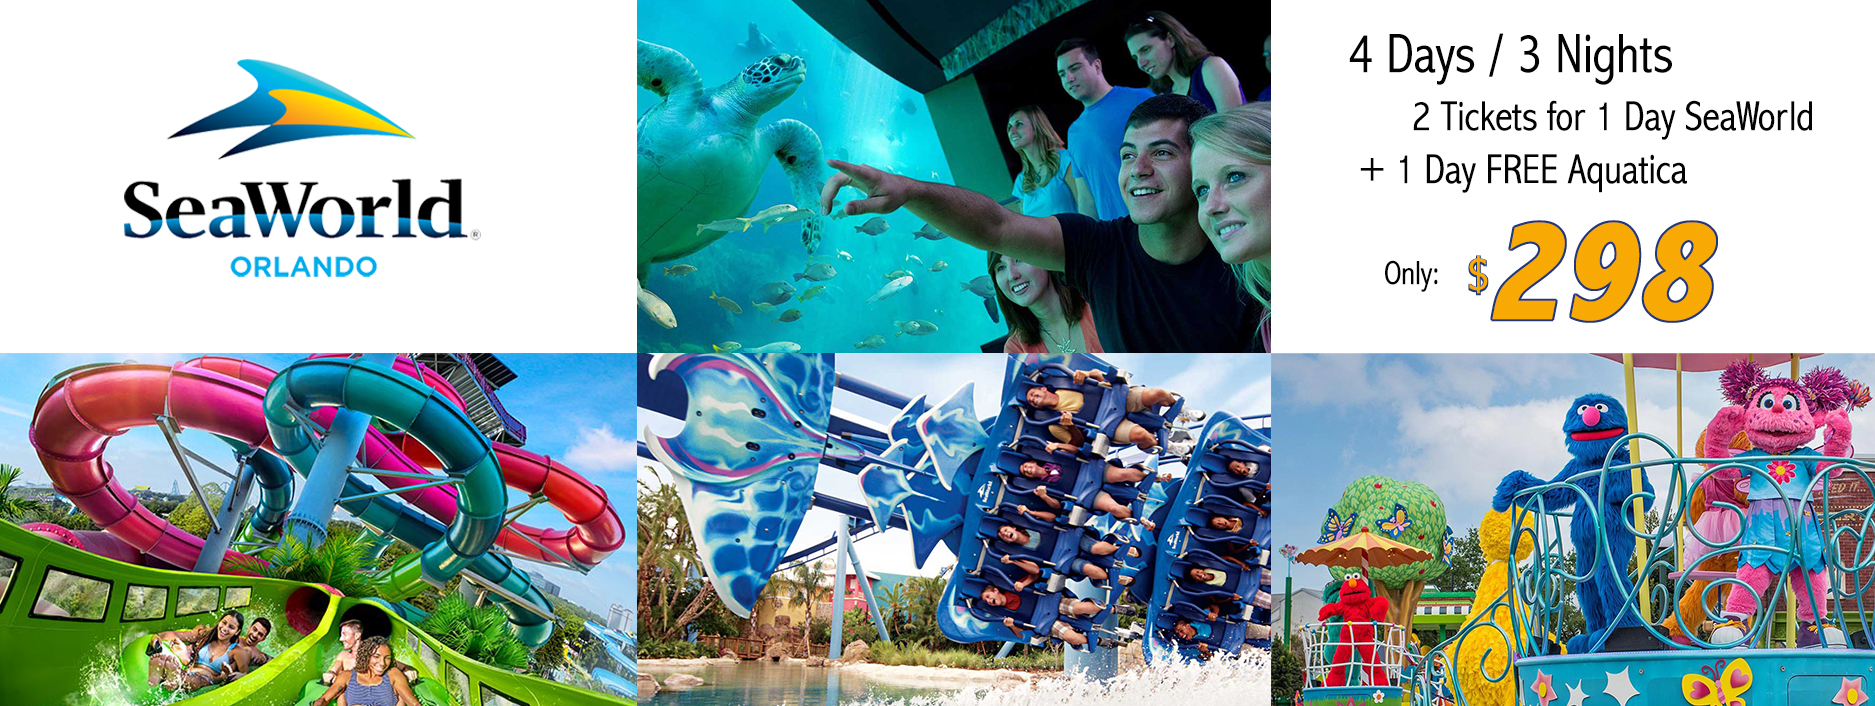 Sea World Vacaton Packages